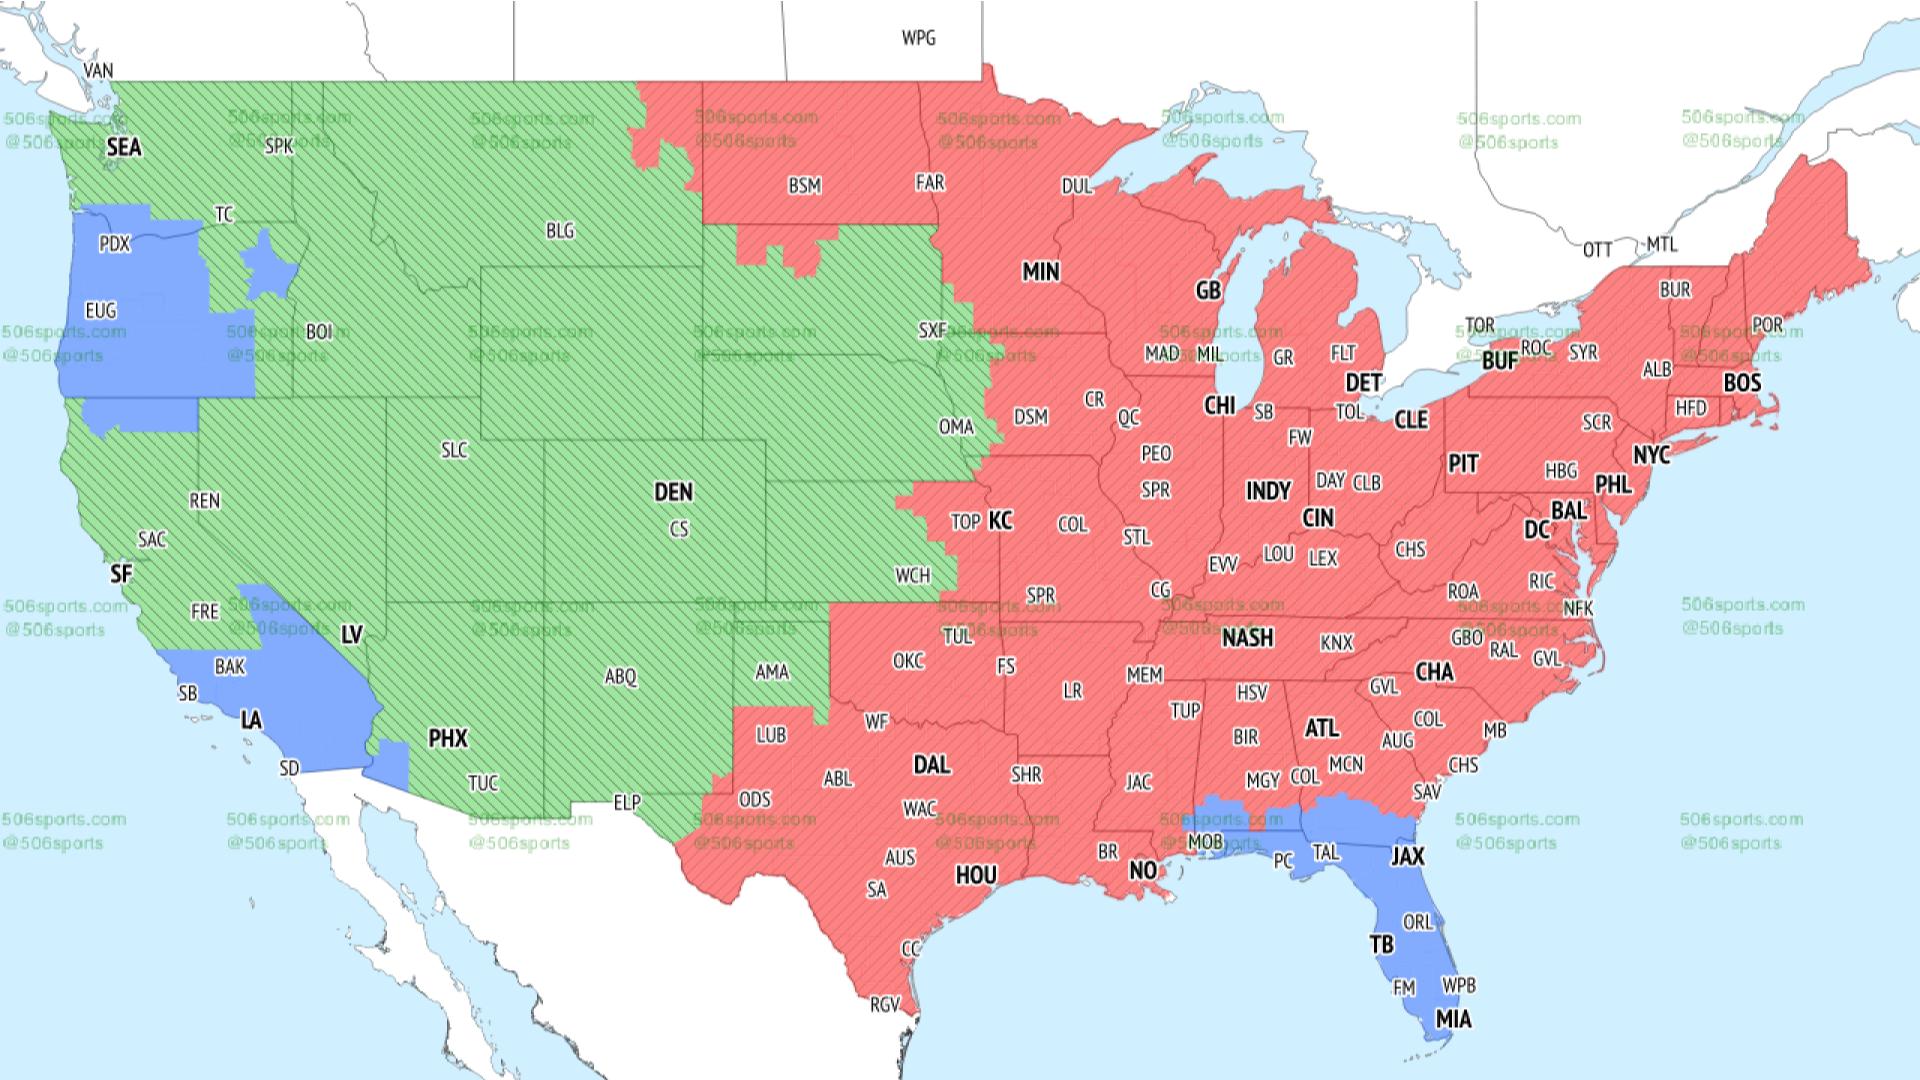 nfl games on tv today in my area